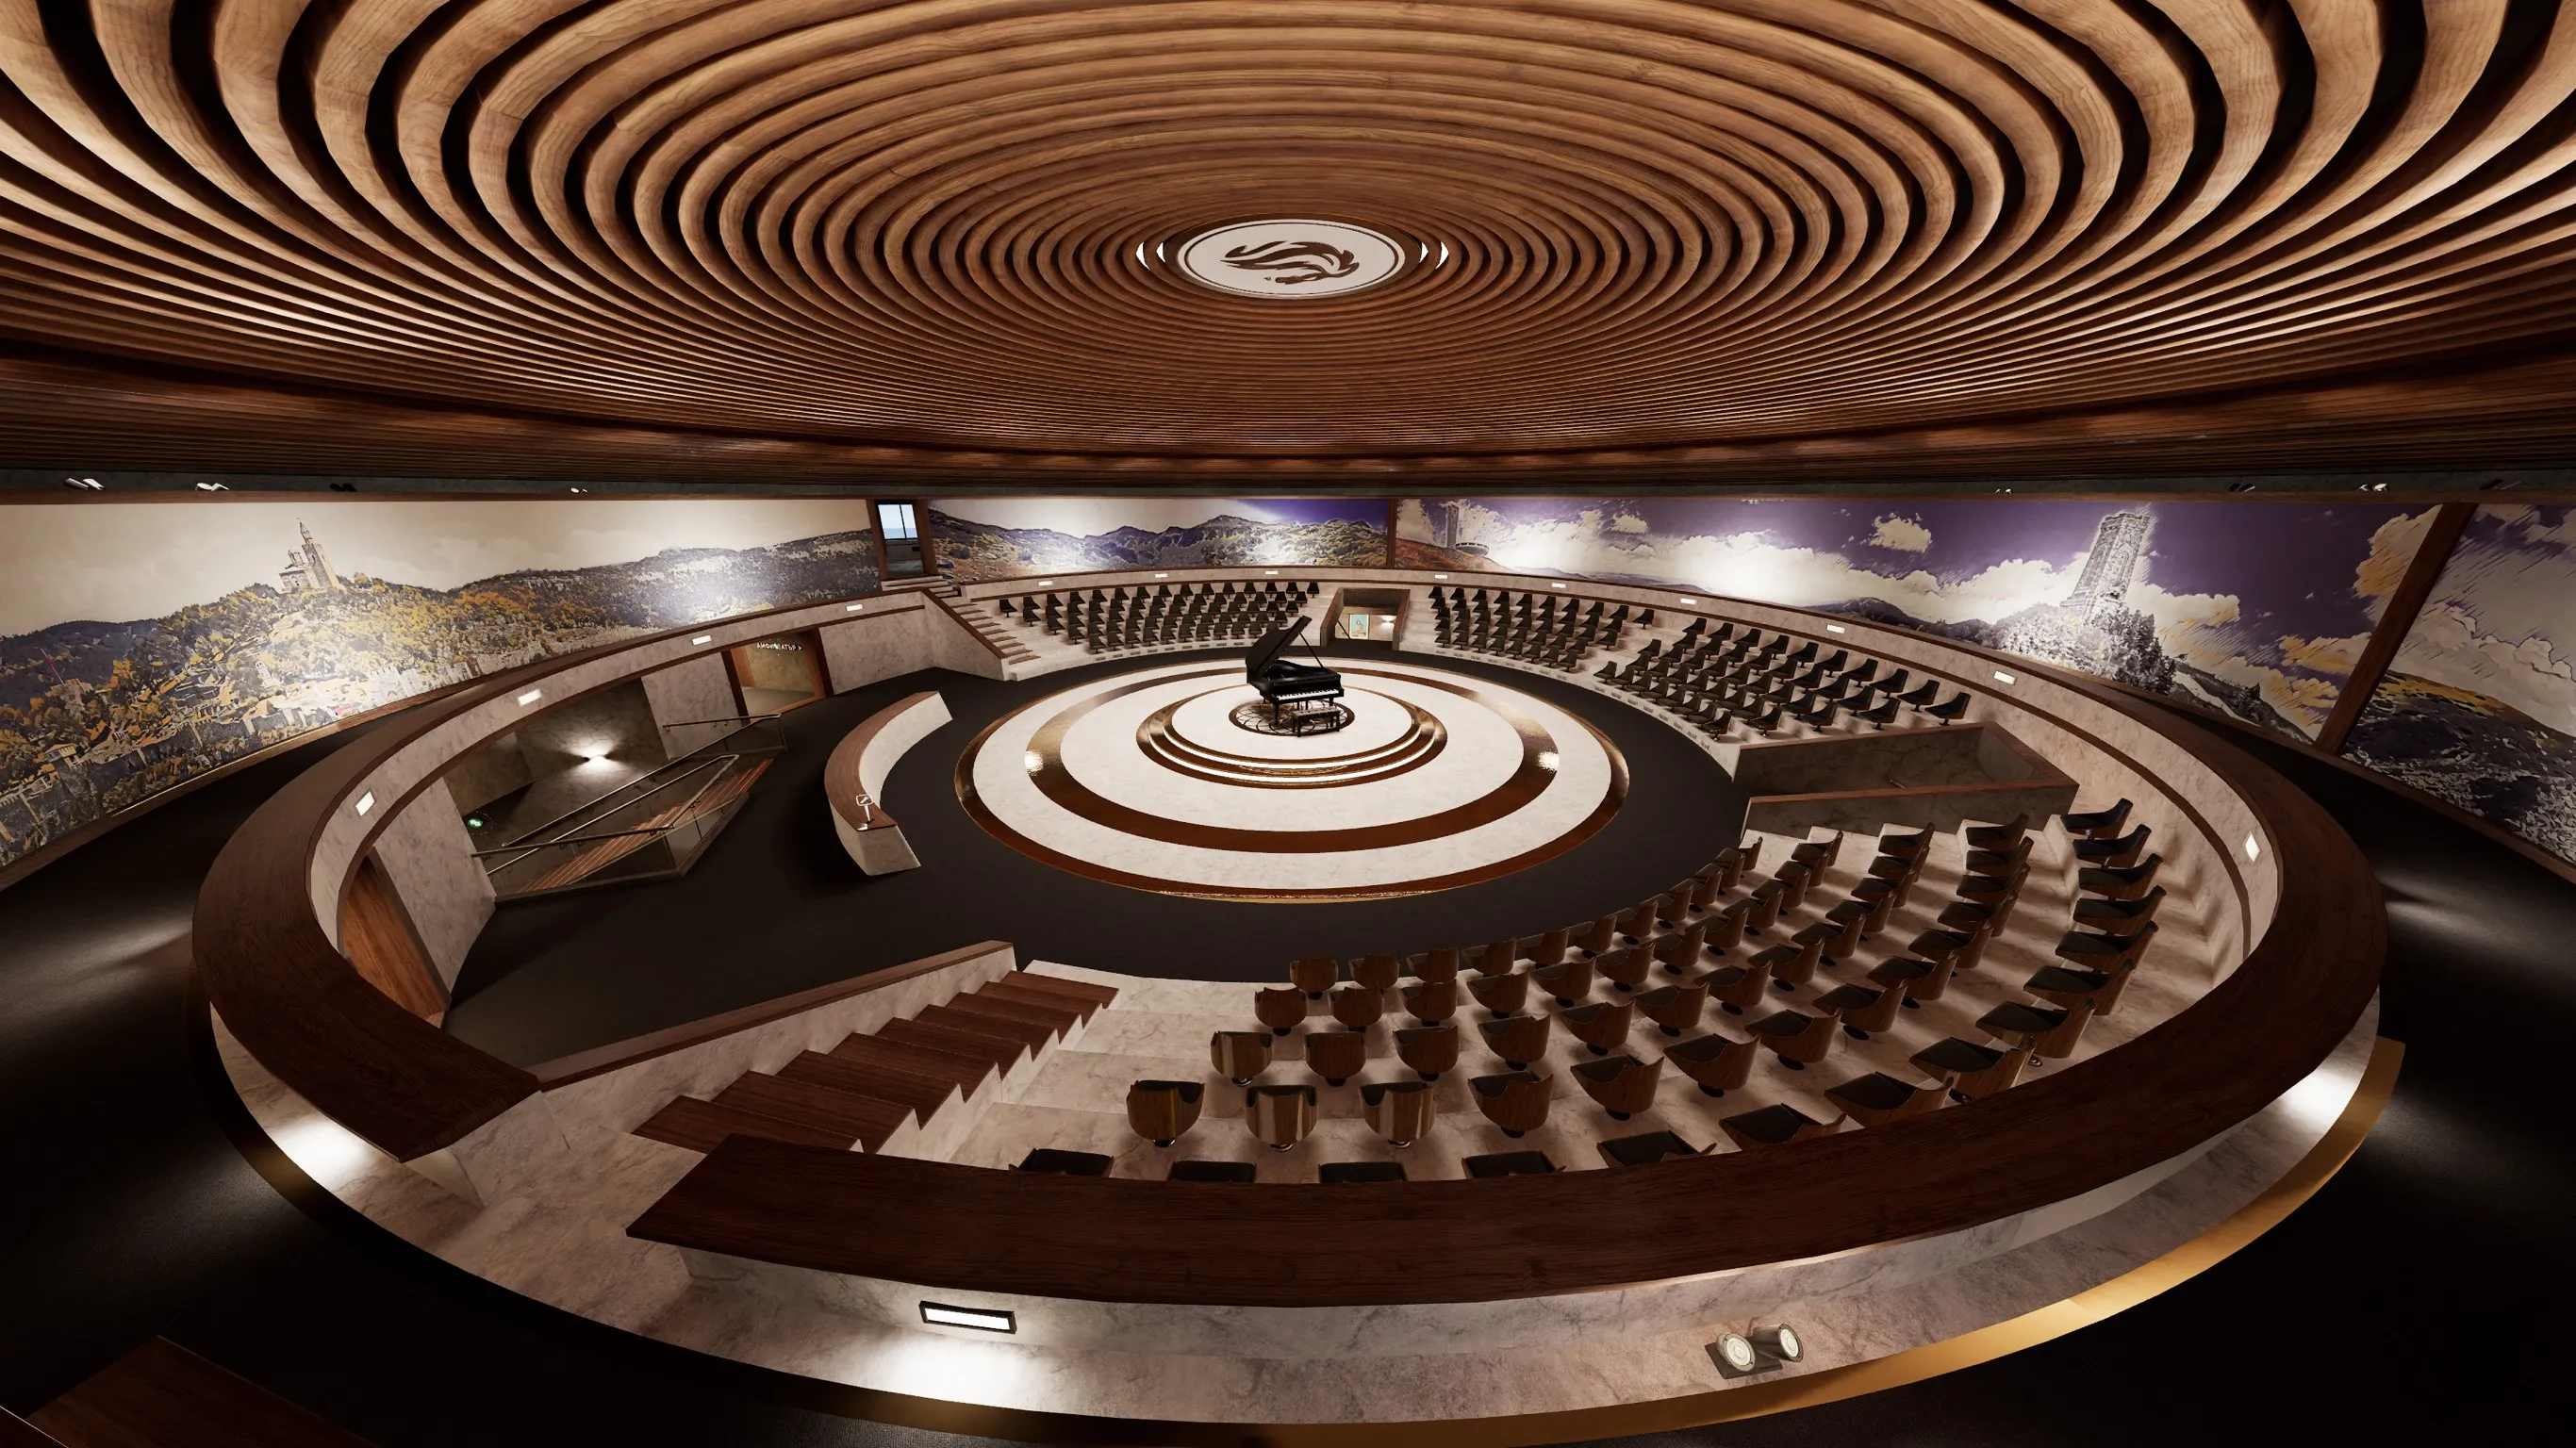 The image features the interior view of the Buzludzha auditorium. The ceiling has a concentric circular pattern with a wood finish that draws the eye toward the centre. Below, the seating is arranged in a semi-circular fashion around a central, elevated platform that has a black grand piano as the focal point. The seats are wooden with black padding. The auditorium has a panoramic backdrop of a large mural depicting a mountainous landscape and a monumental building on the peak, possibly indicating the setting's cultural or historical significance. The floor has a circular design that complements the ceiling, creating a harmonious and sophisticated aesthetic. The space appears modern, with spotlights embedded in the floor, and exudes an air of elegance and acoustic consideration.